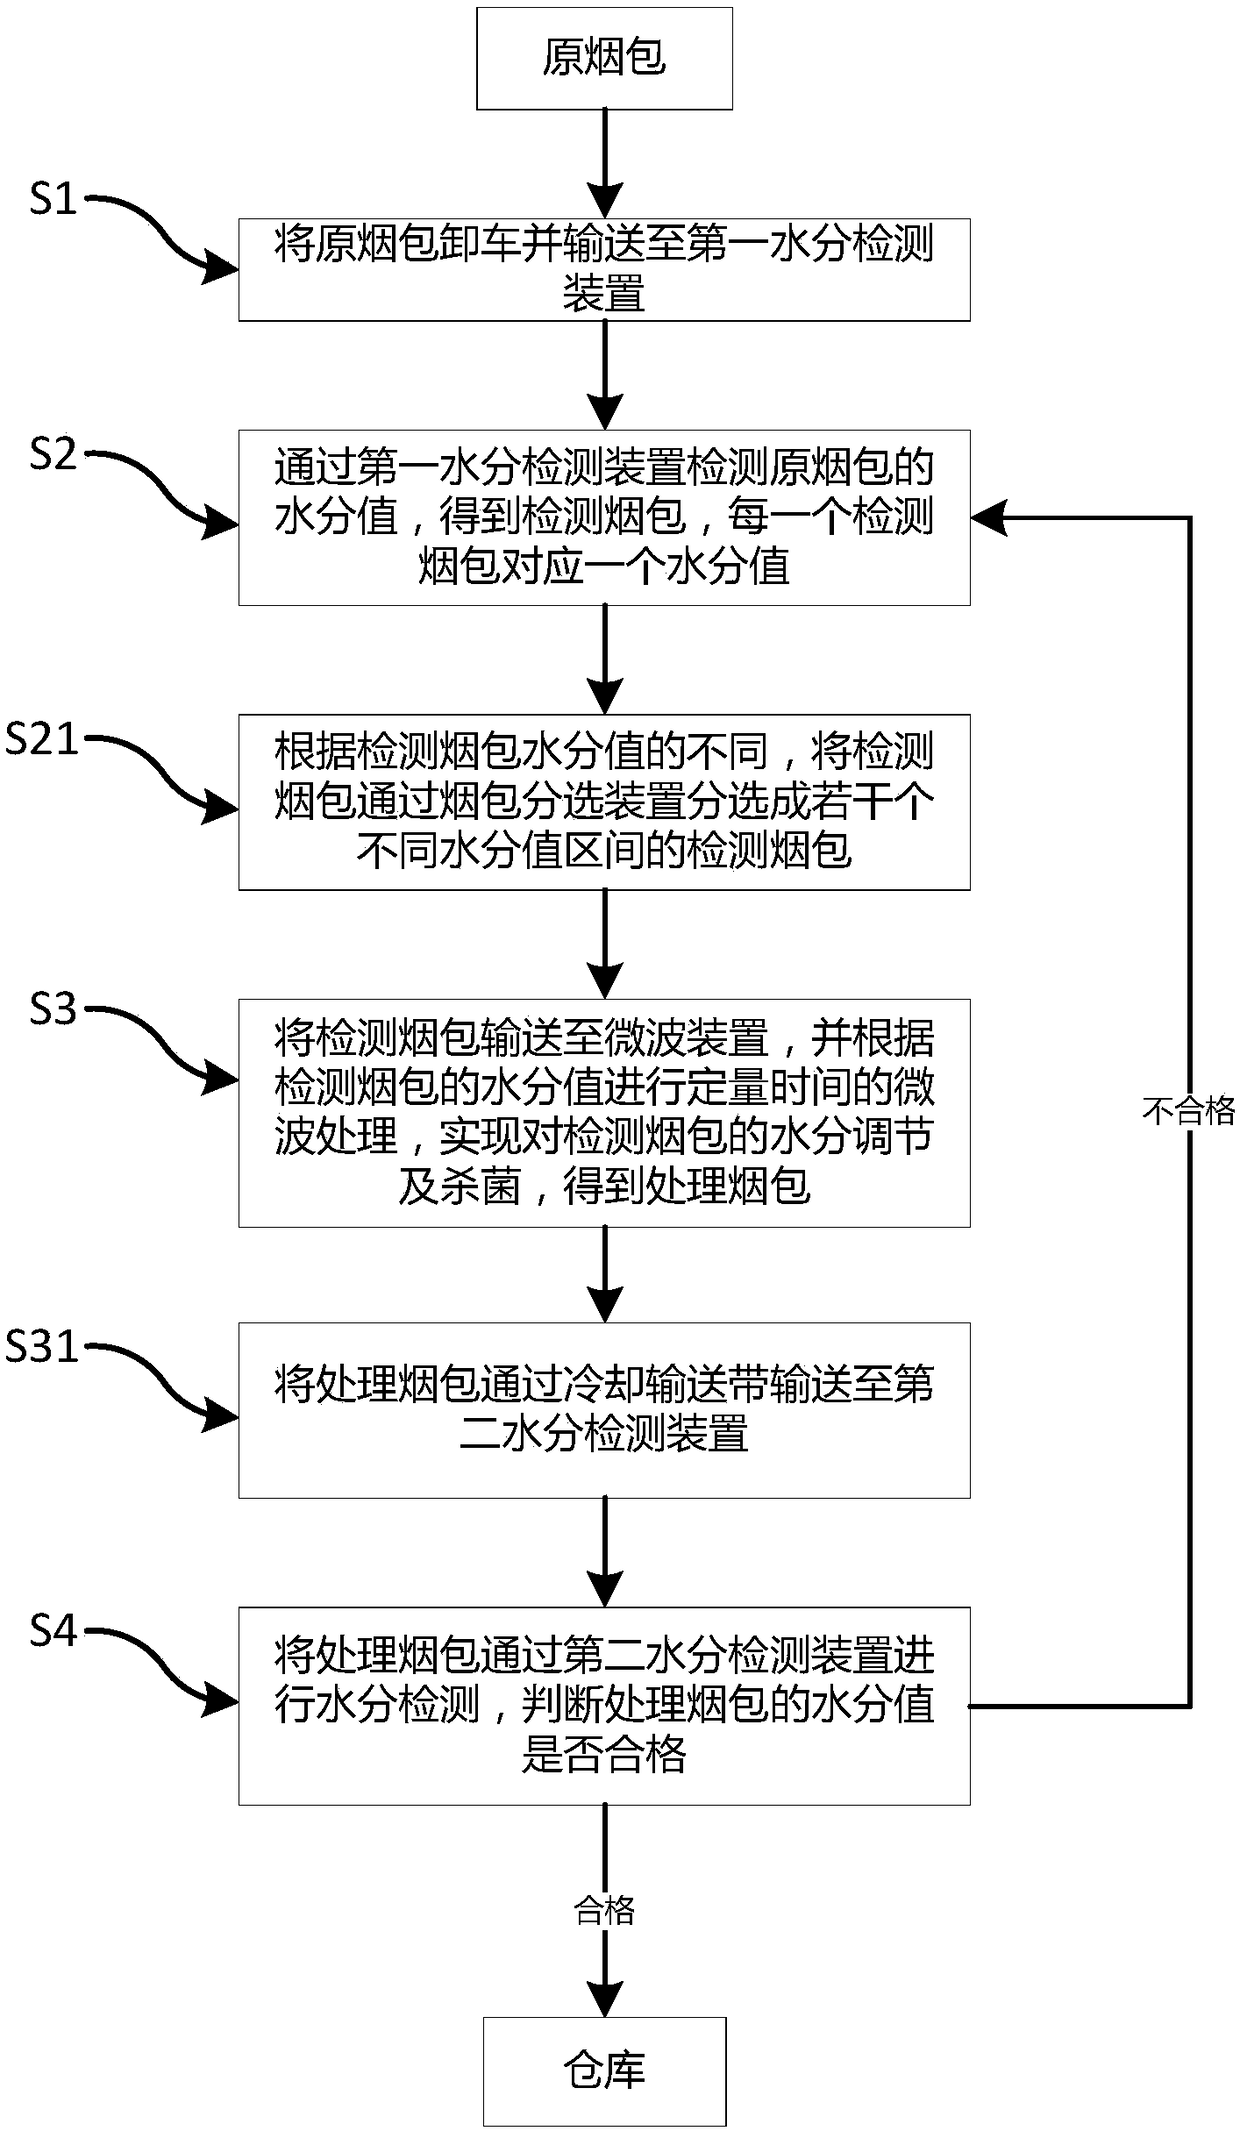 Method and apparatus for on-line sterilization and moisture adjustment of crude tobacco packers